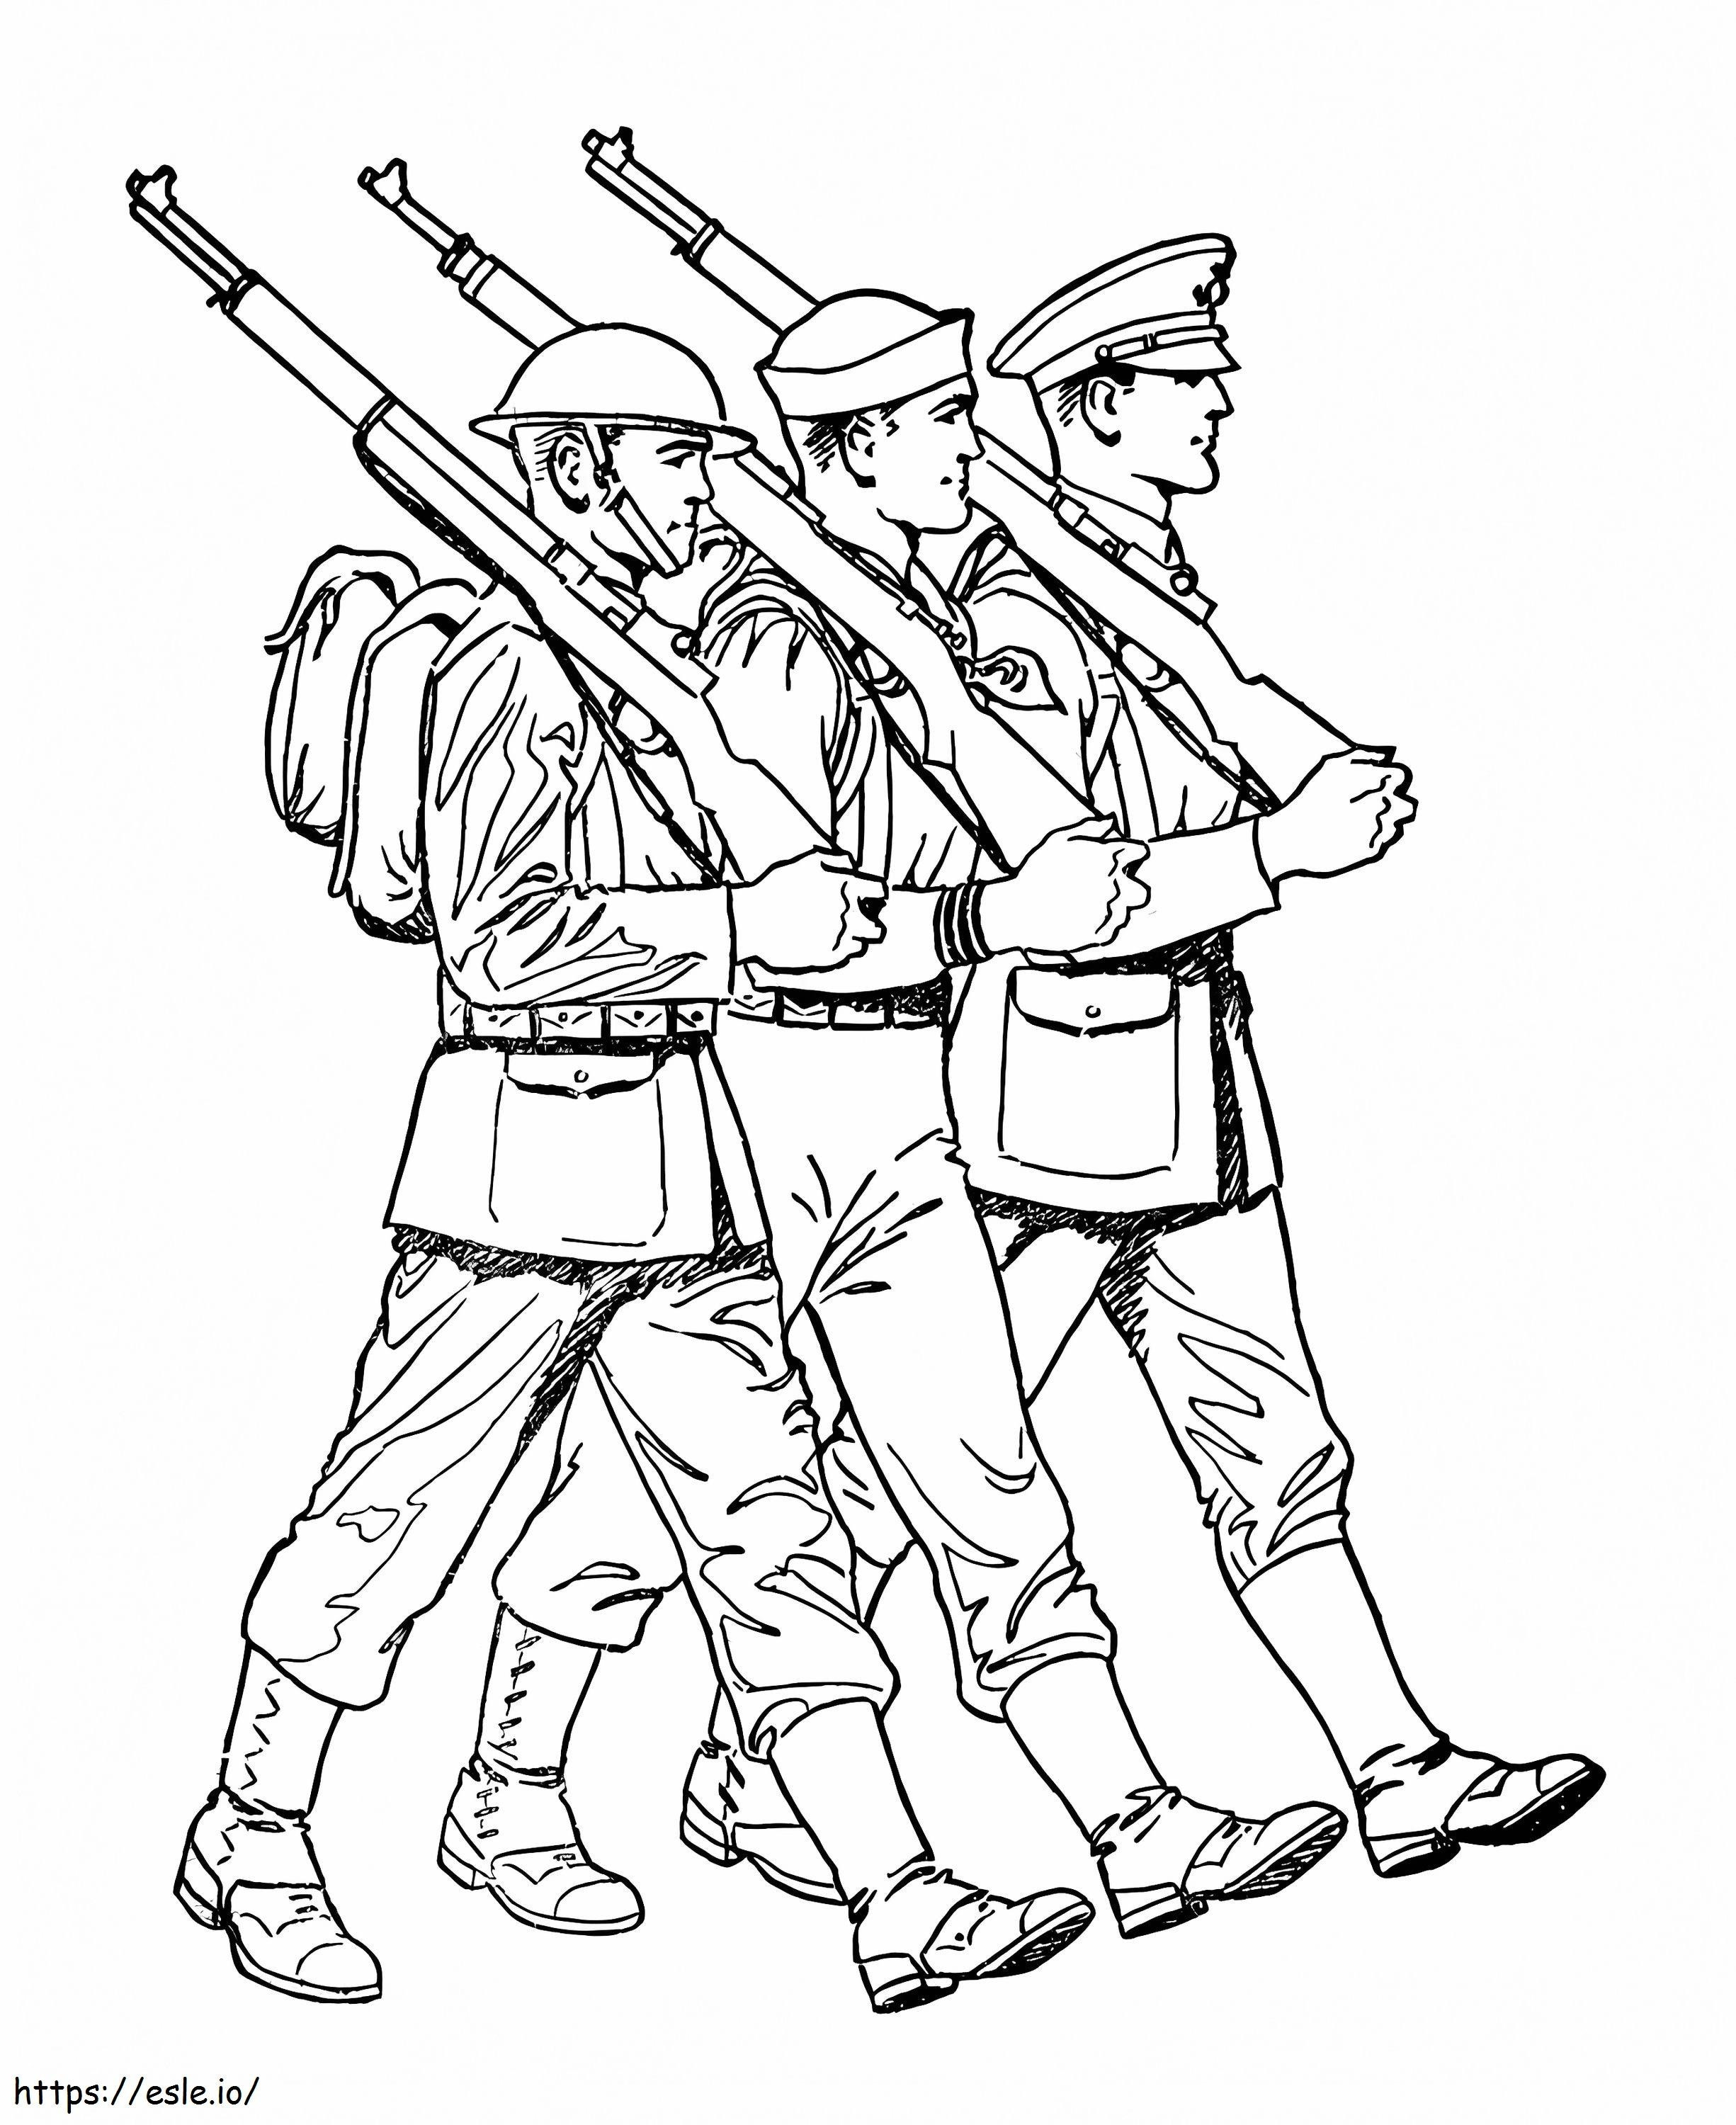 Three Soliders coloring page